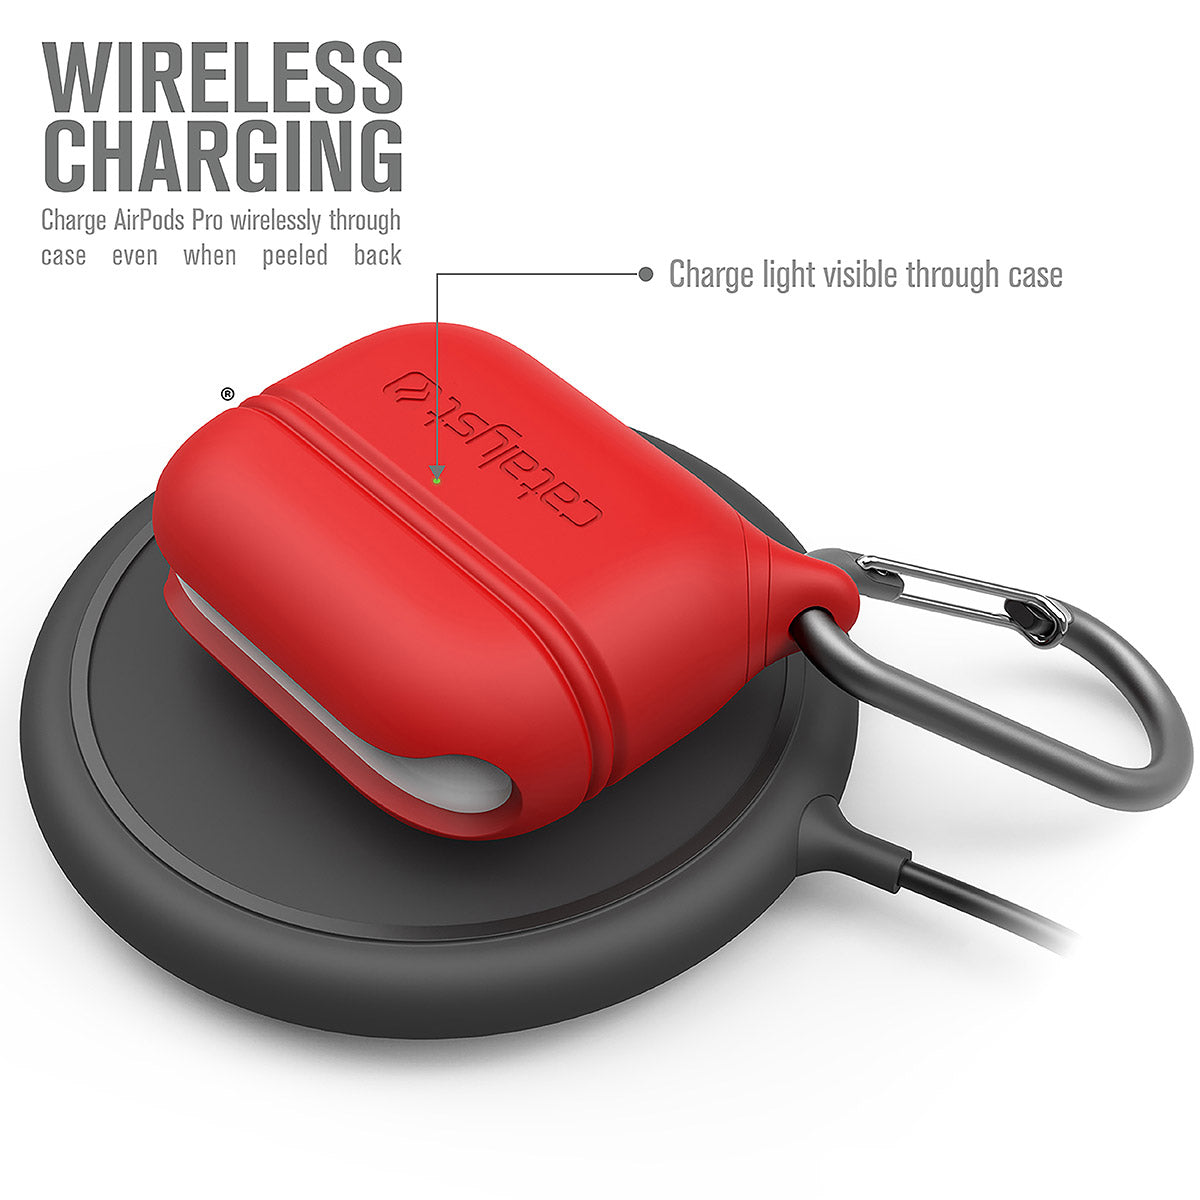 CATAPLAPDPRORED | catalyst airpods pro gen 2 1 waterproof case carabiner special edition red on top of a wireless charger text reads wireless charging charge airpods pro wirelessly through case even when peeled back charge light visible through case